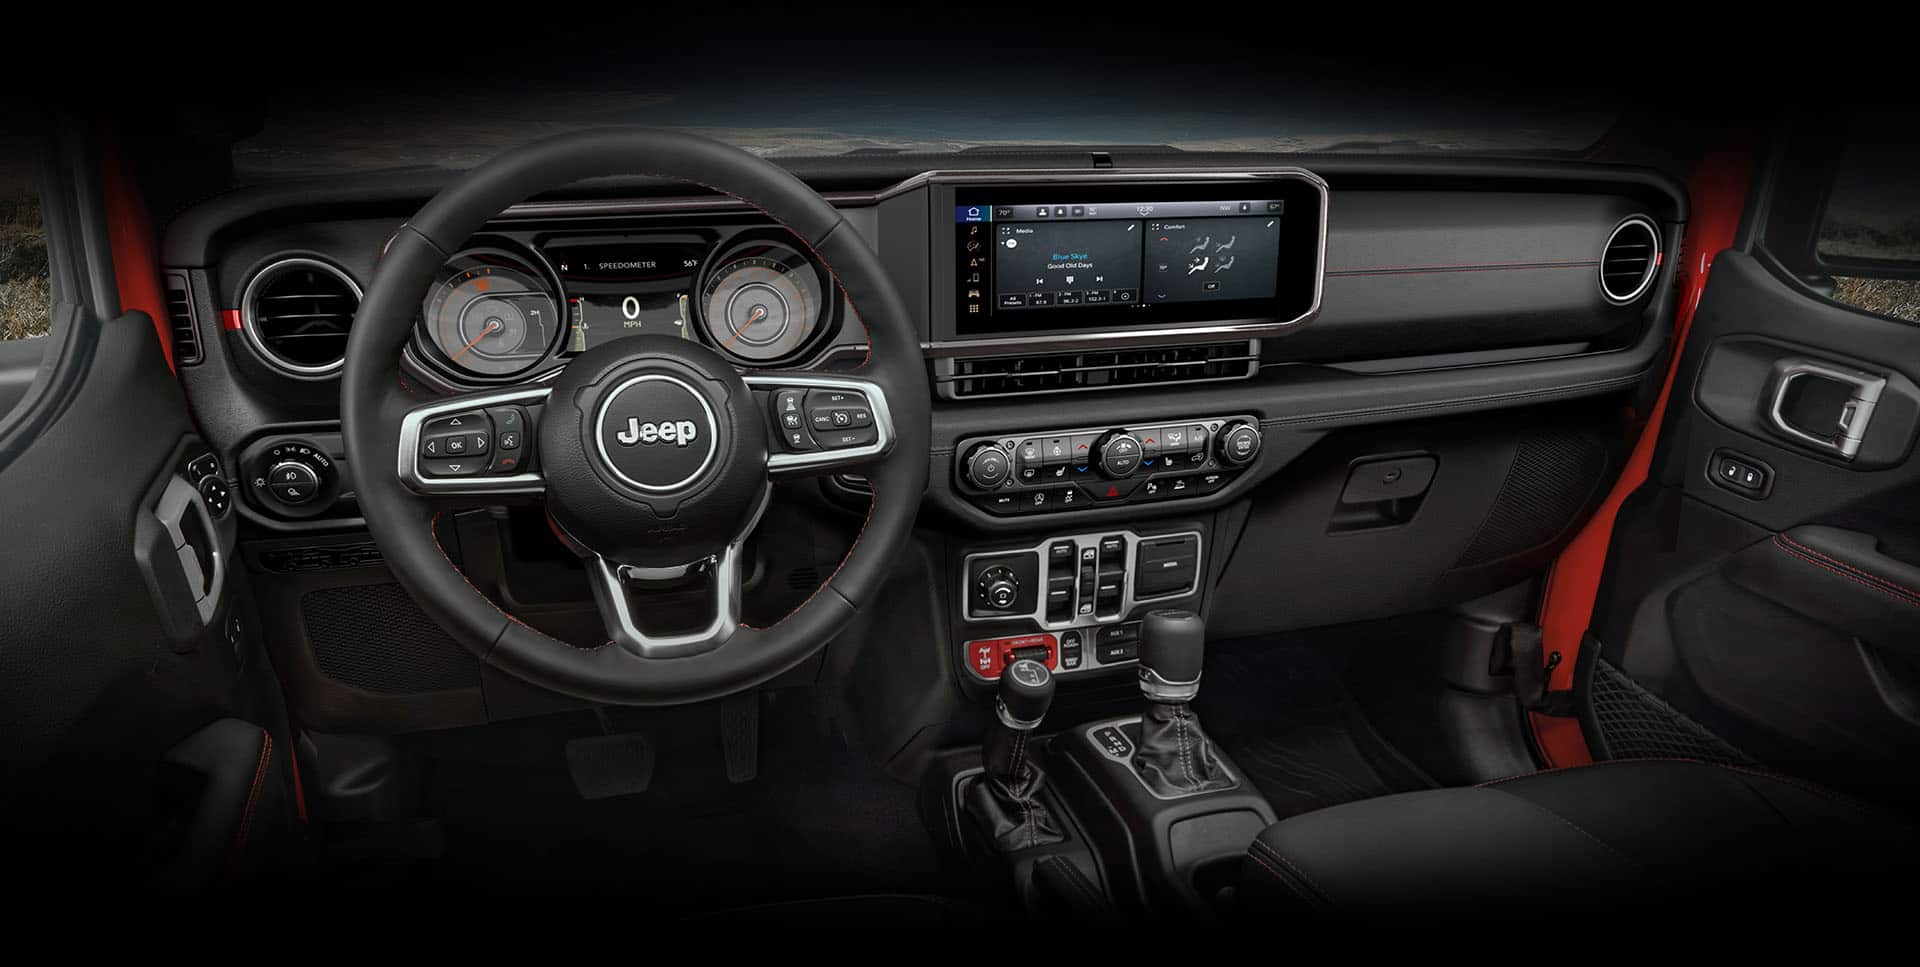 The steering wheel, Driver Information Digital Cluster, Uconnect touchscreen, center stack controls and dash in the 2024 Jeep Gladiator Rubicon.